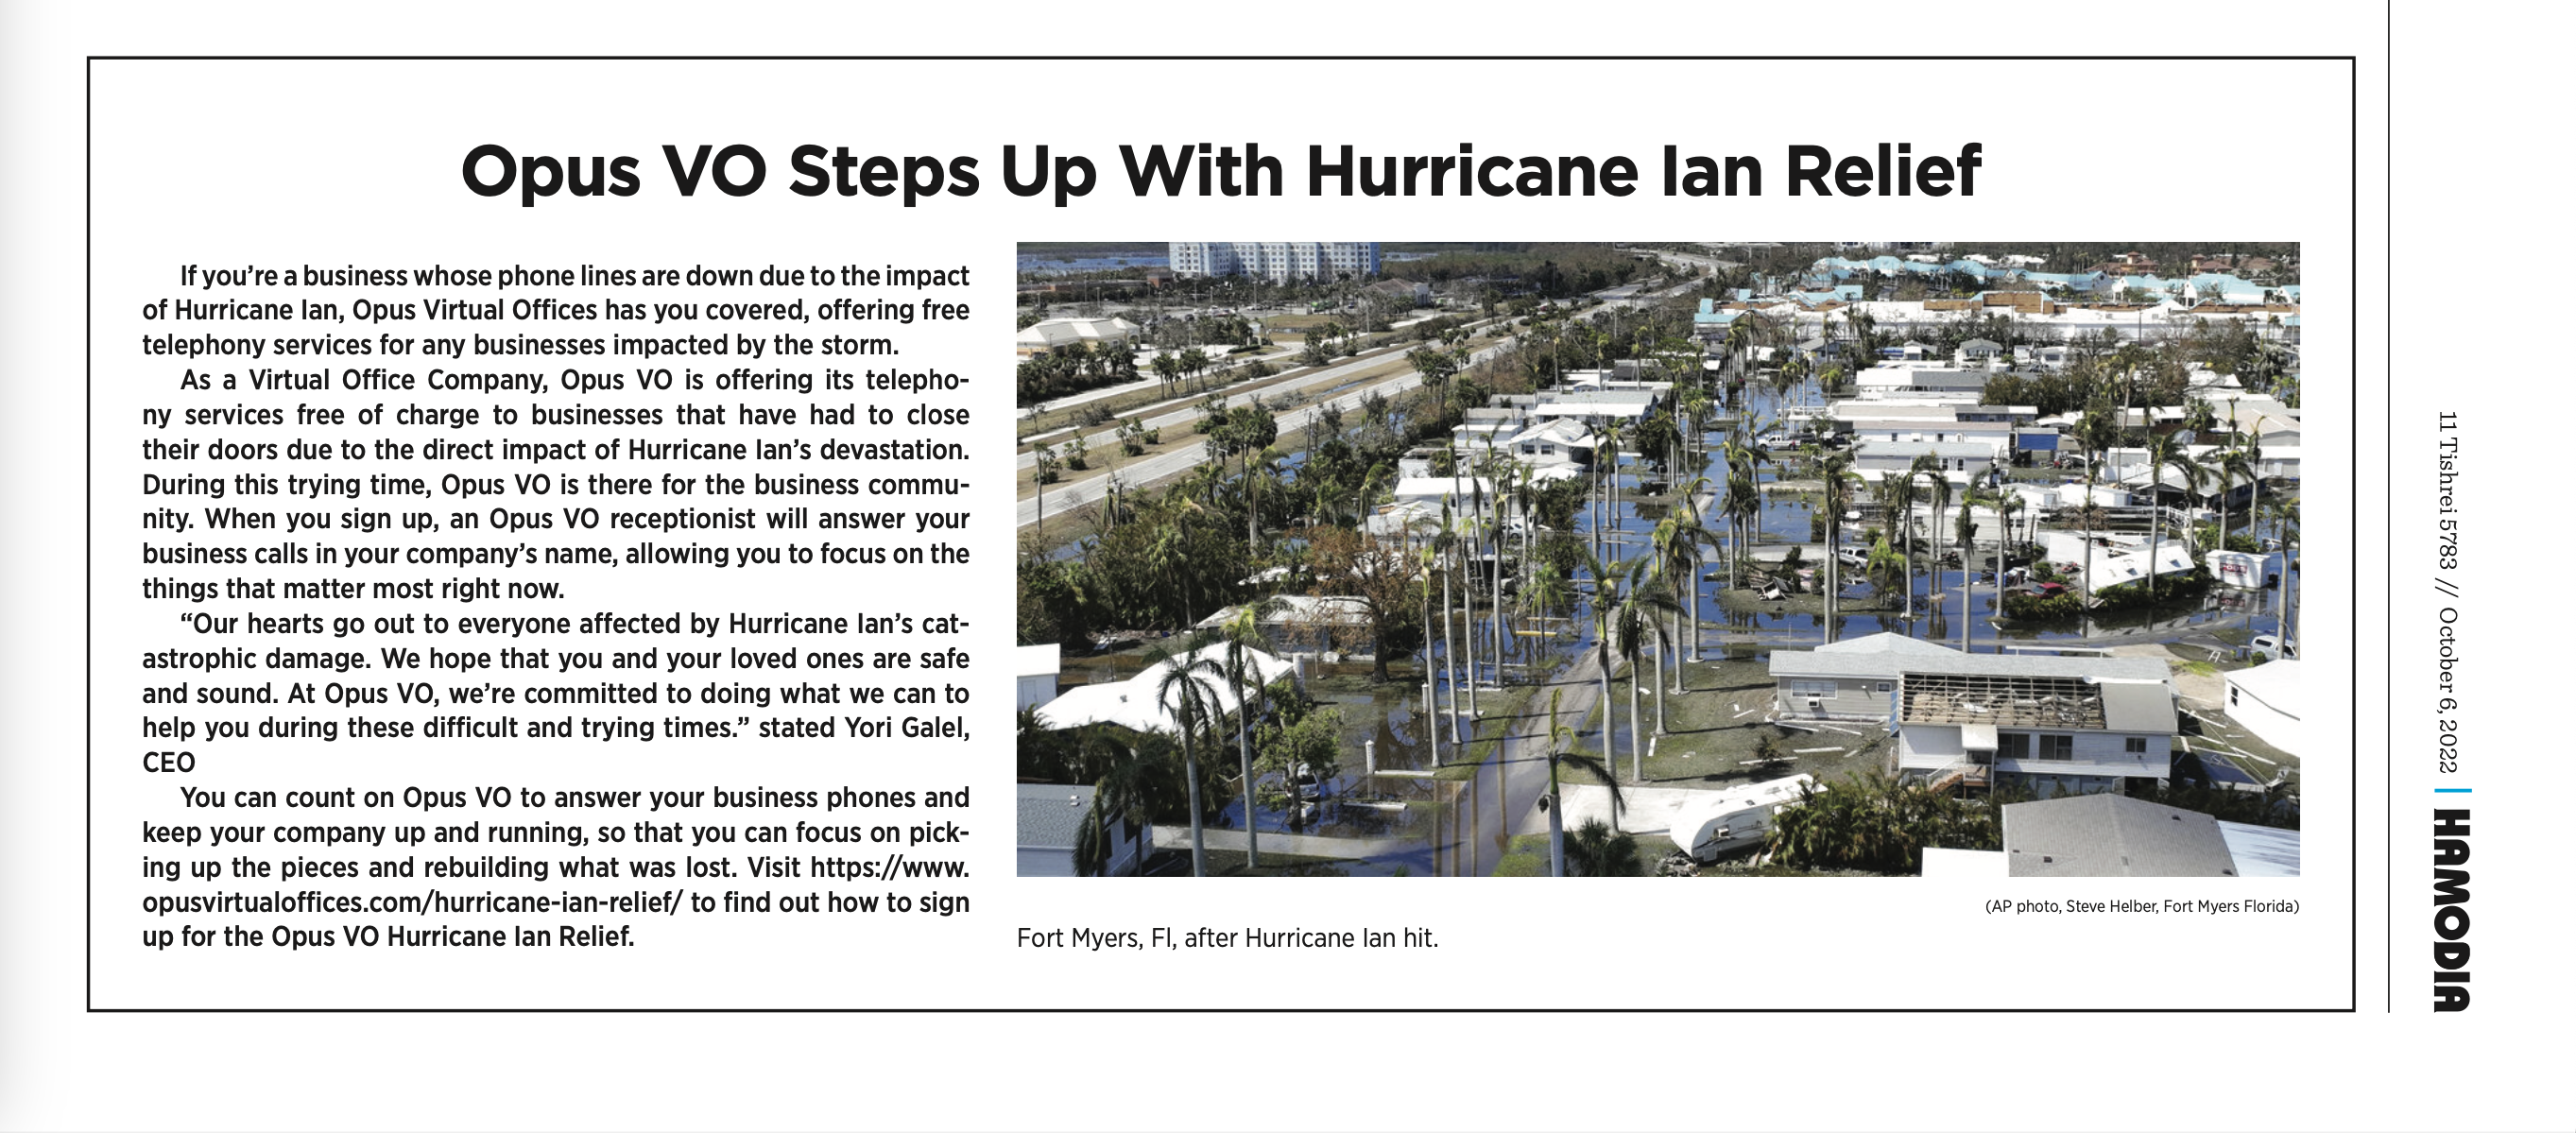 Opus VO Steps Up With Hurricane Ian Relief